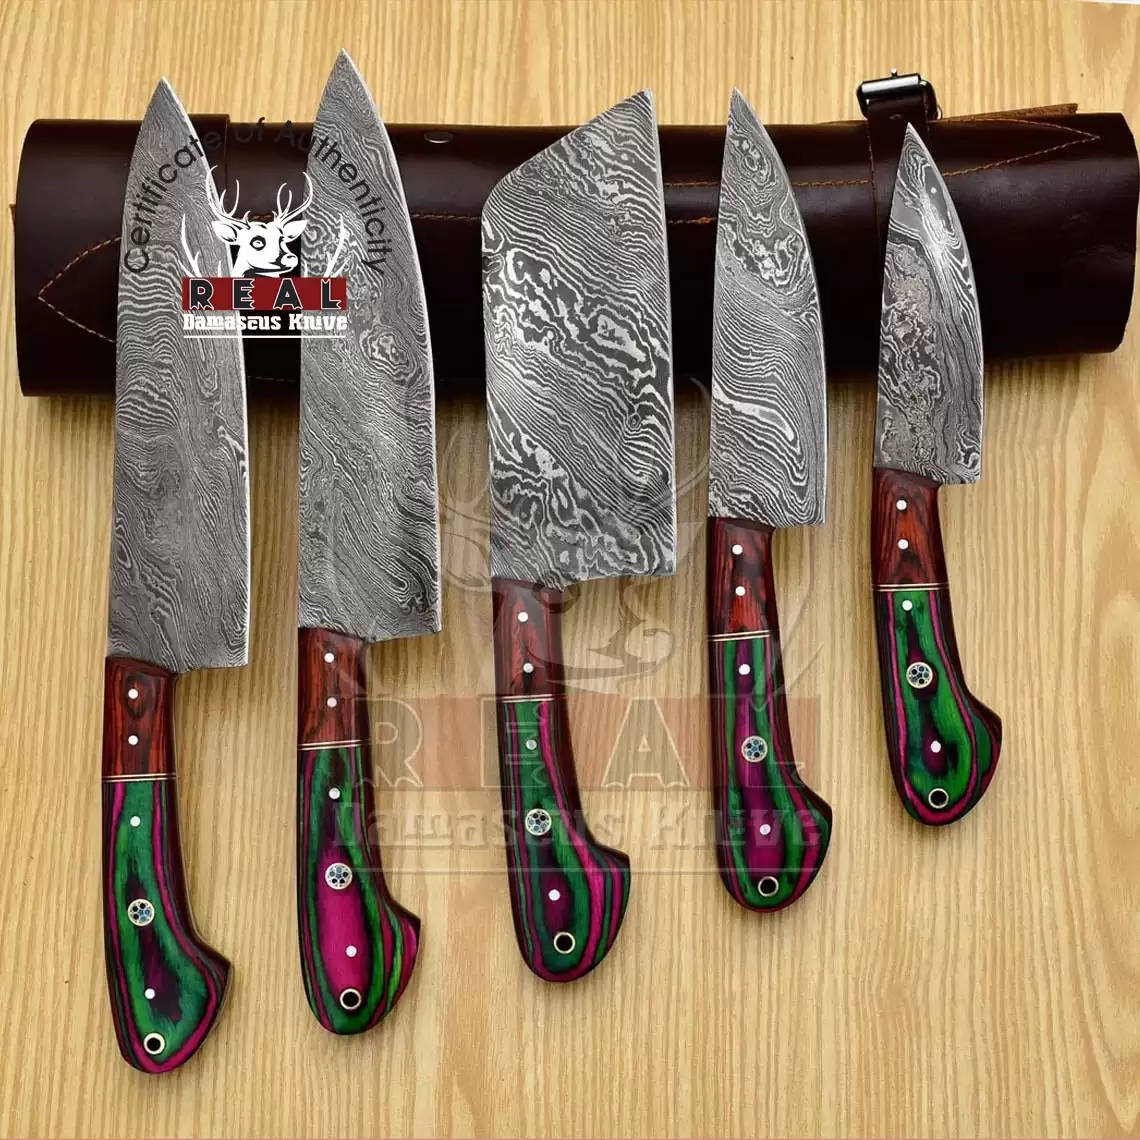 https://www.realdamascusknive.com/image/cache/cache/1001-2000/1240/main/d4f9-handmade-damascus-chef-set-of-5pcs-with-leather-0-1-1140x1140.webp